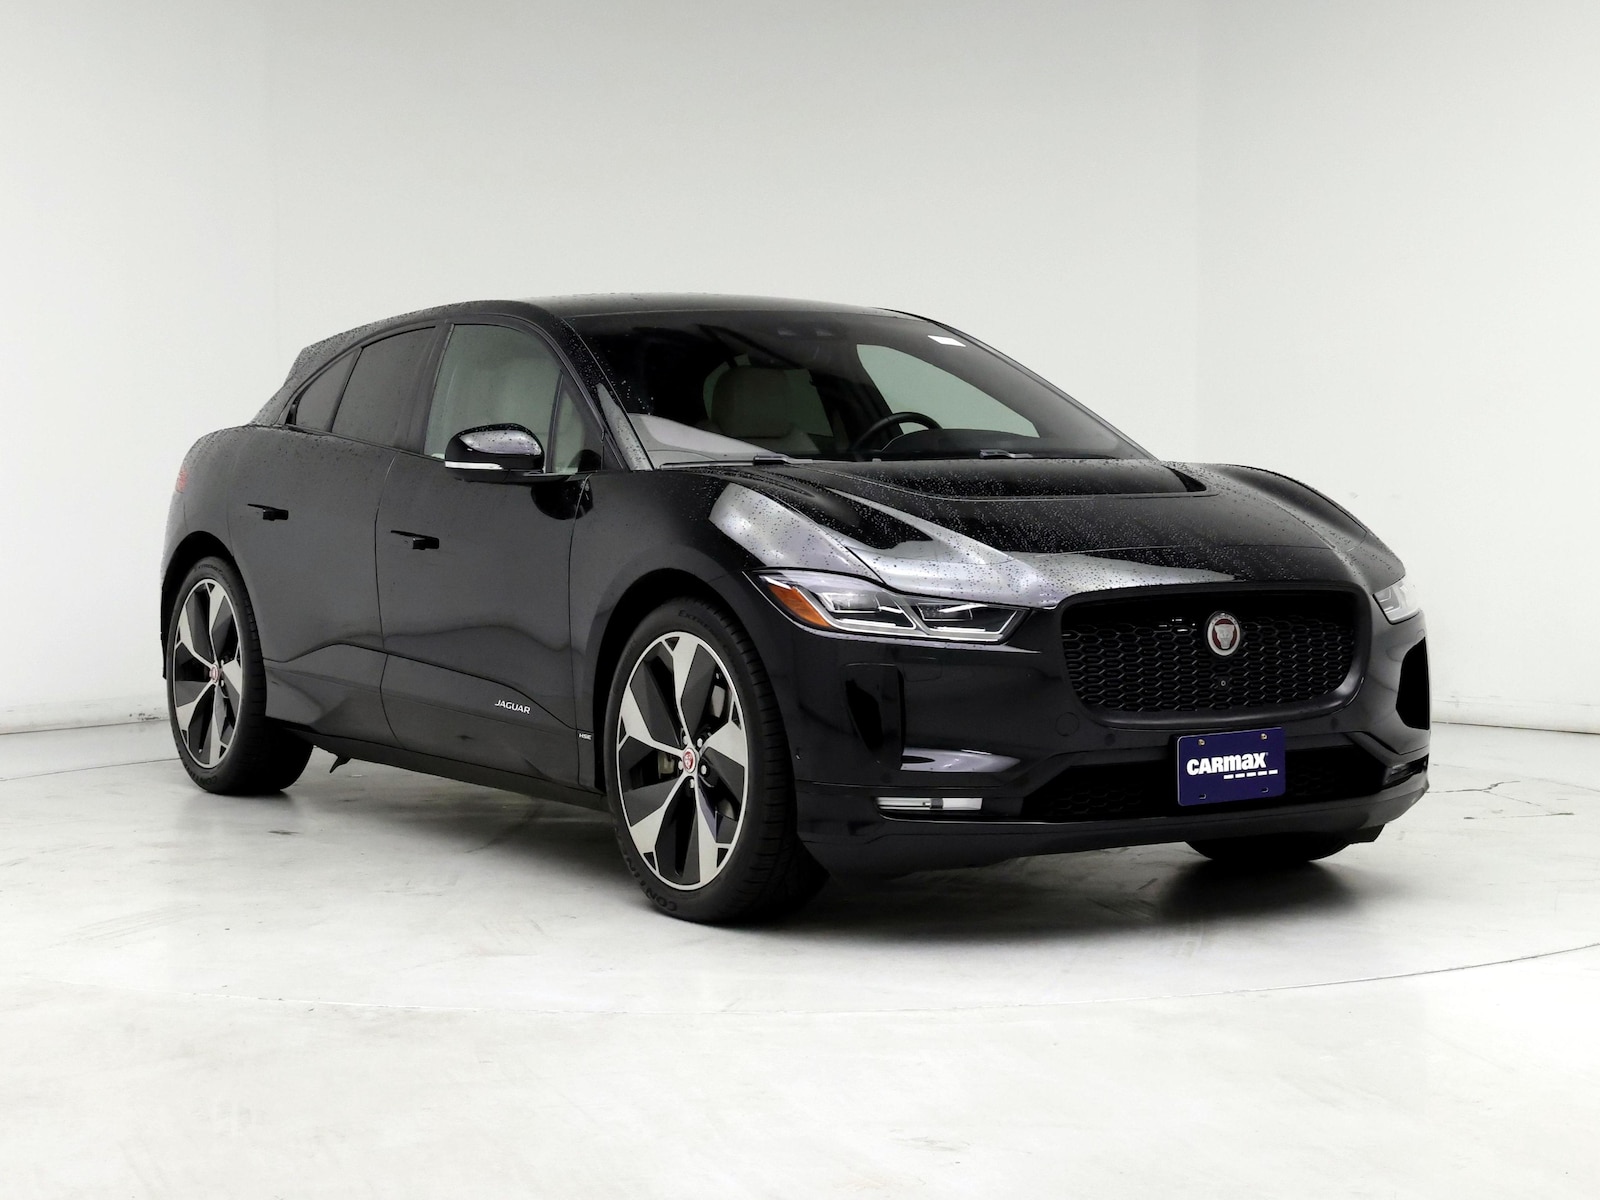 Used 2019 Jaguar I-PACE First Edition with VIN SADHD2S19K1F66011 for sale in Kenosha, WI